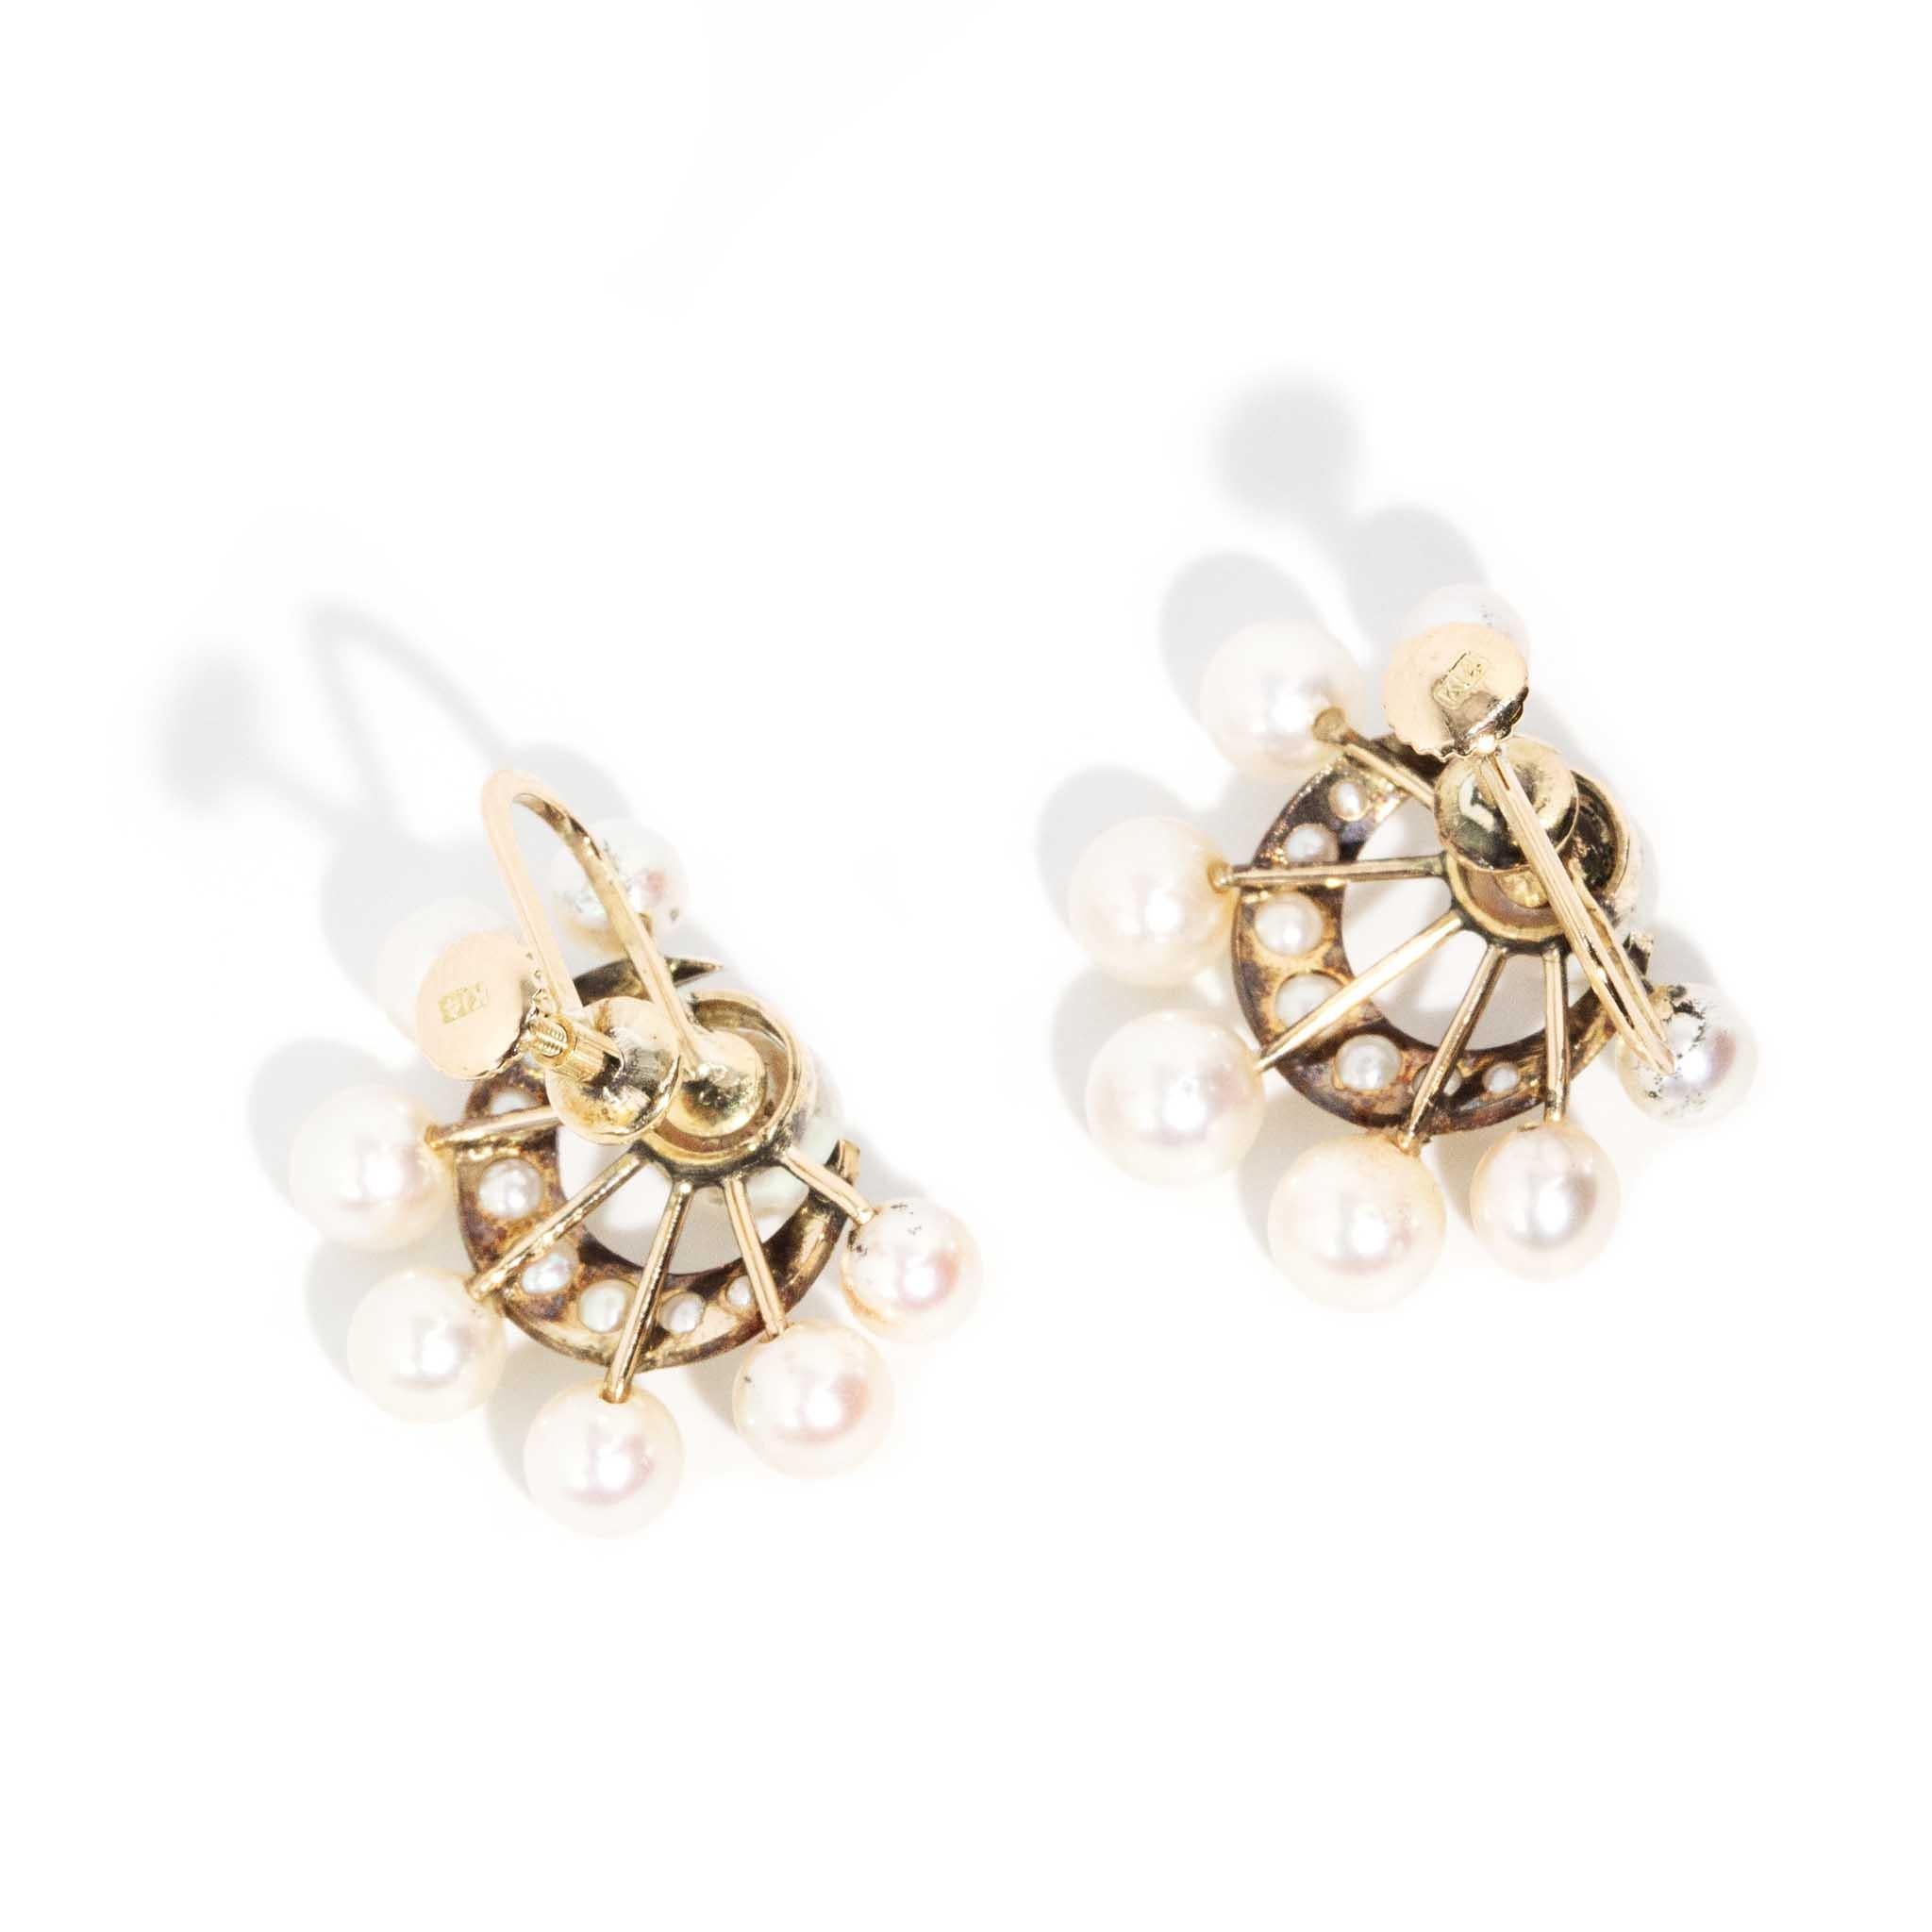 Round Cut Antique Victorian Era Pearl & Seed Pearl Moon Cluster Earrings 14 Carat Gold For Sale